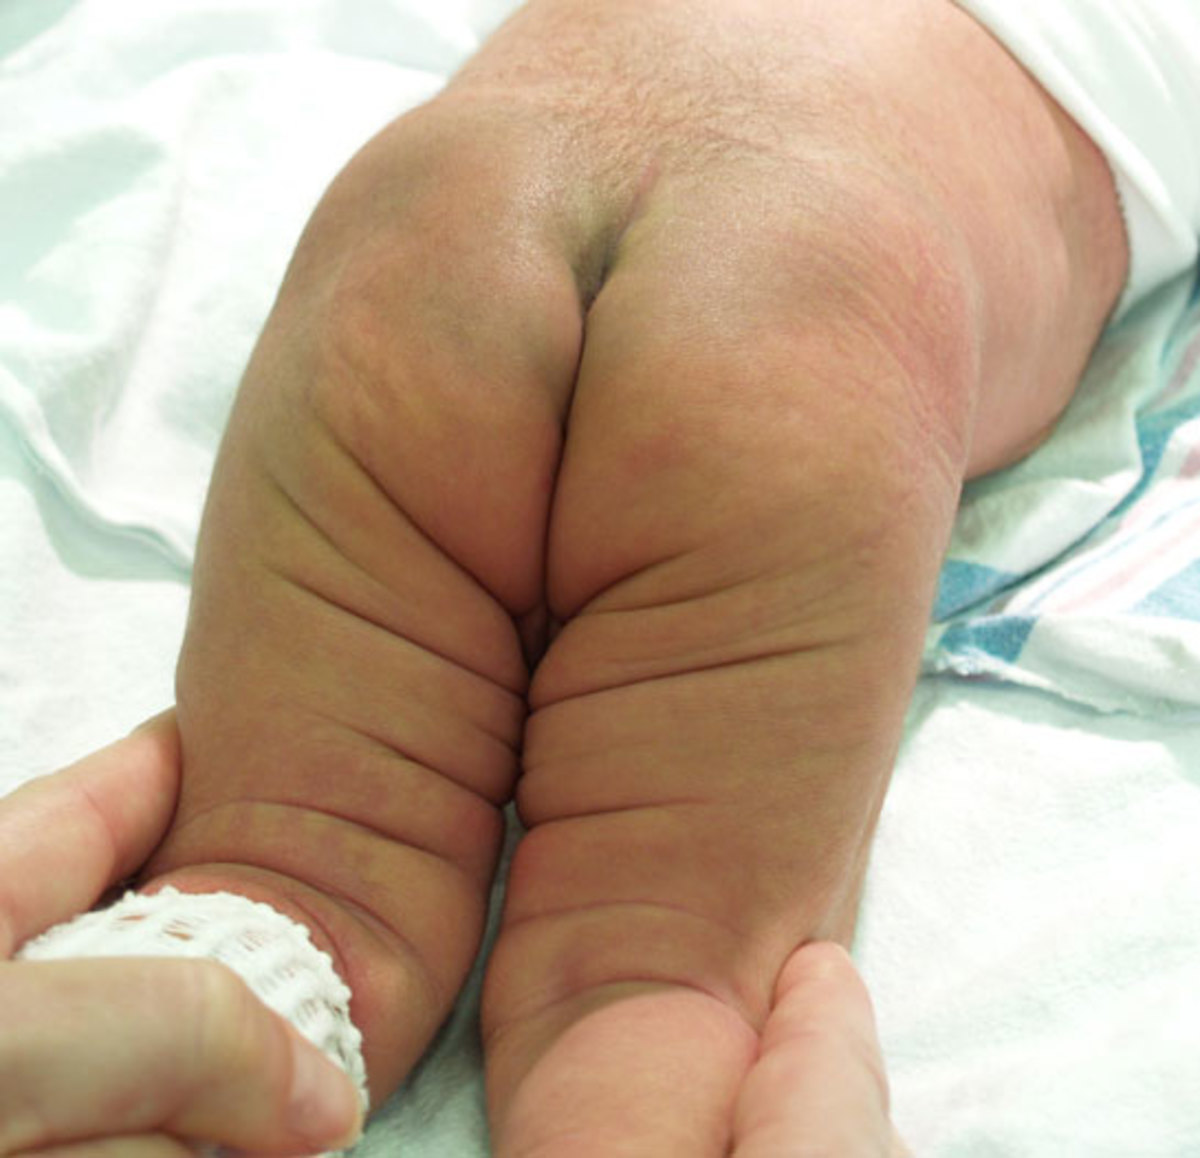  Asymmetry between the major creases in the thighs is a sign of DDH   